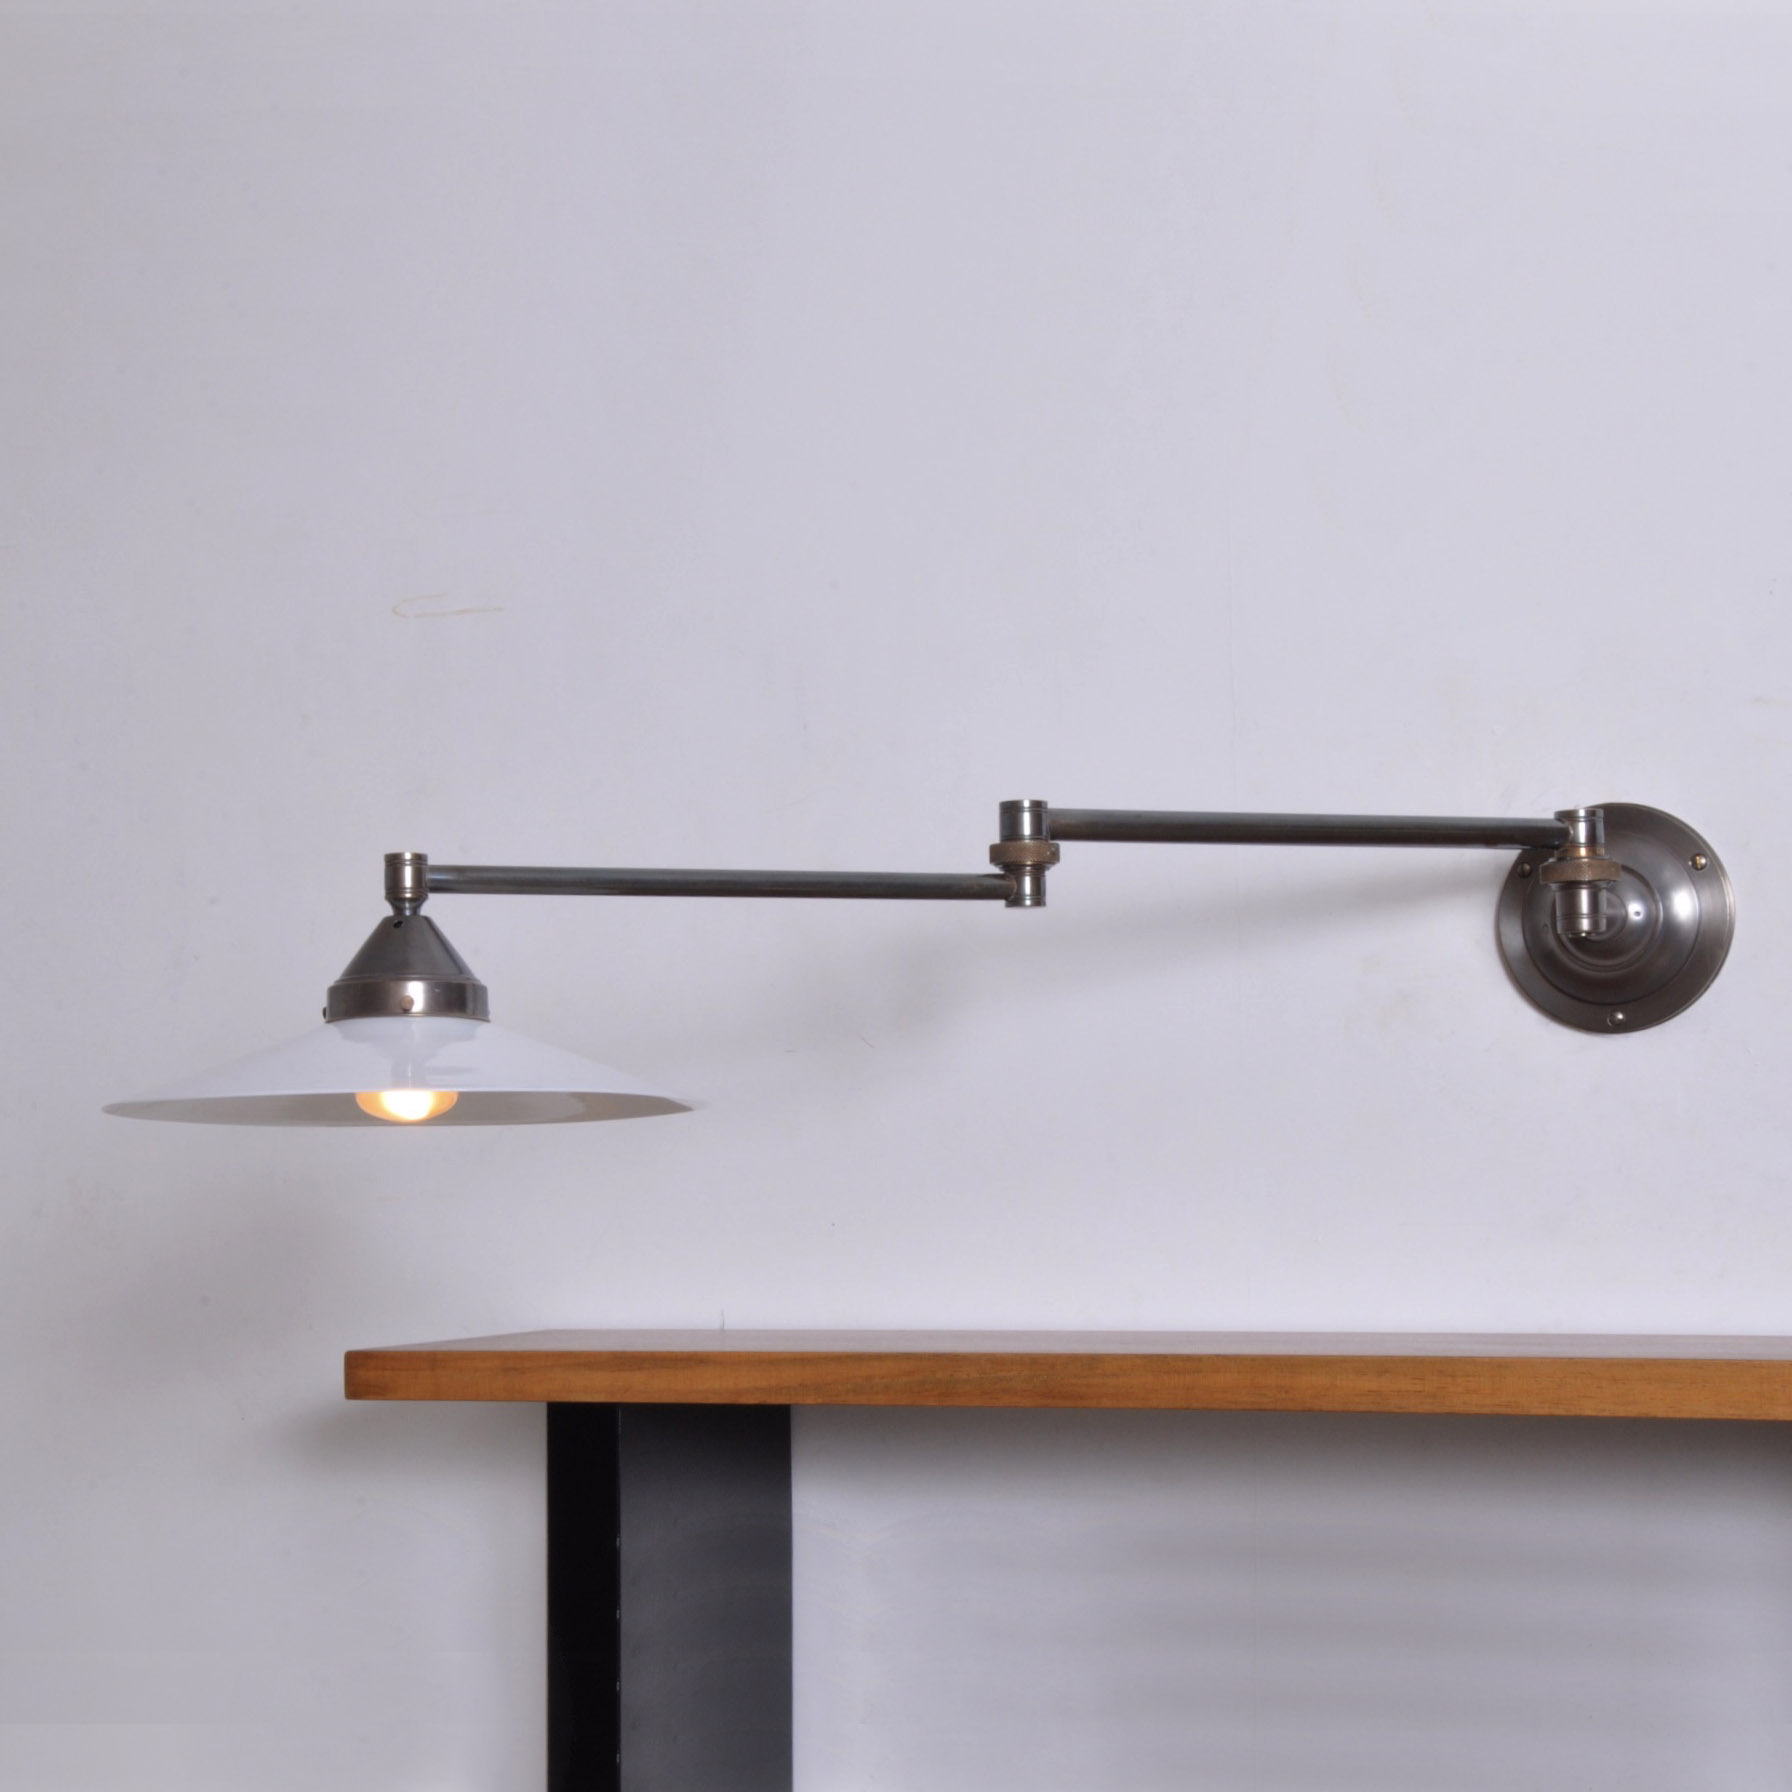 Pair of Swing Arm Wall Lamps, Switzerland 1940s Image